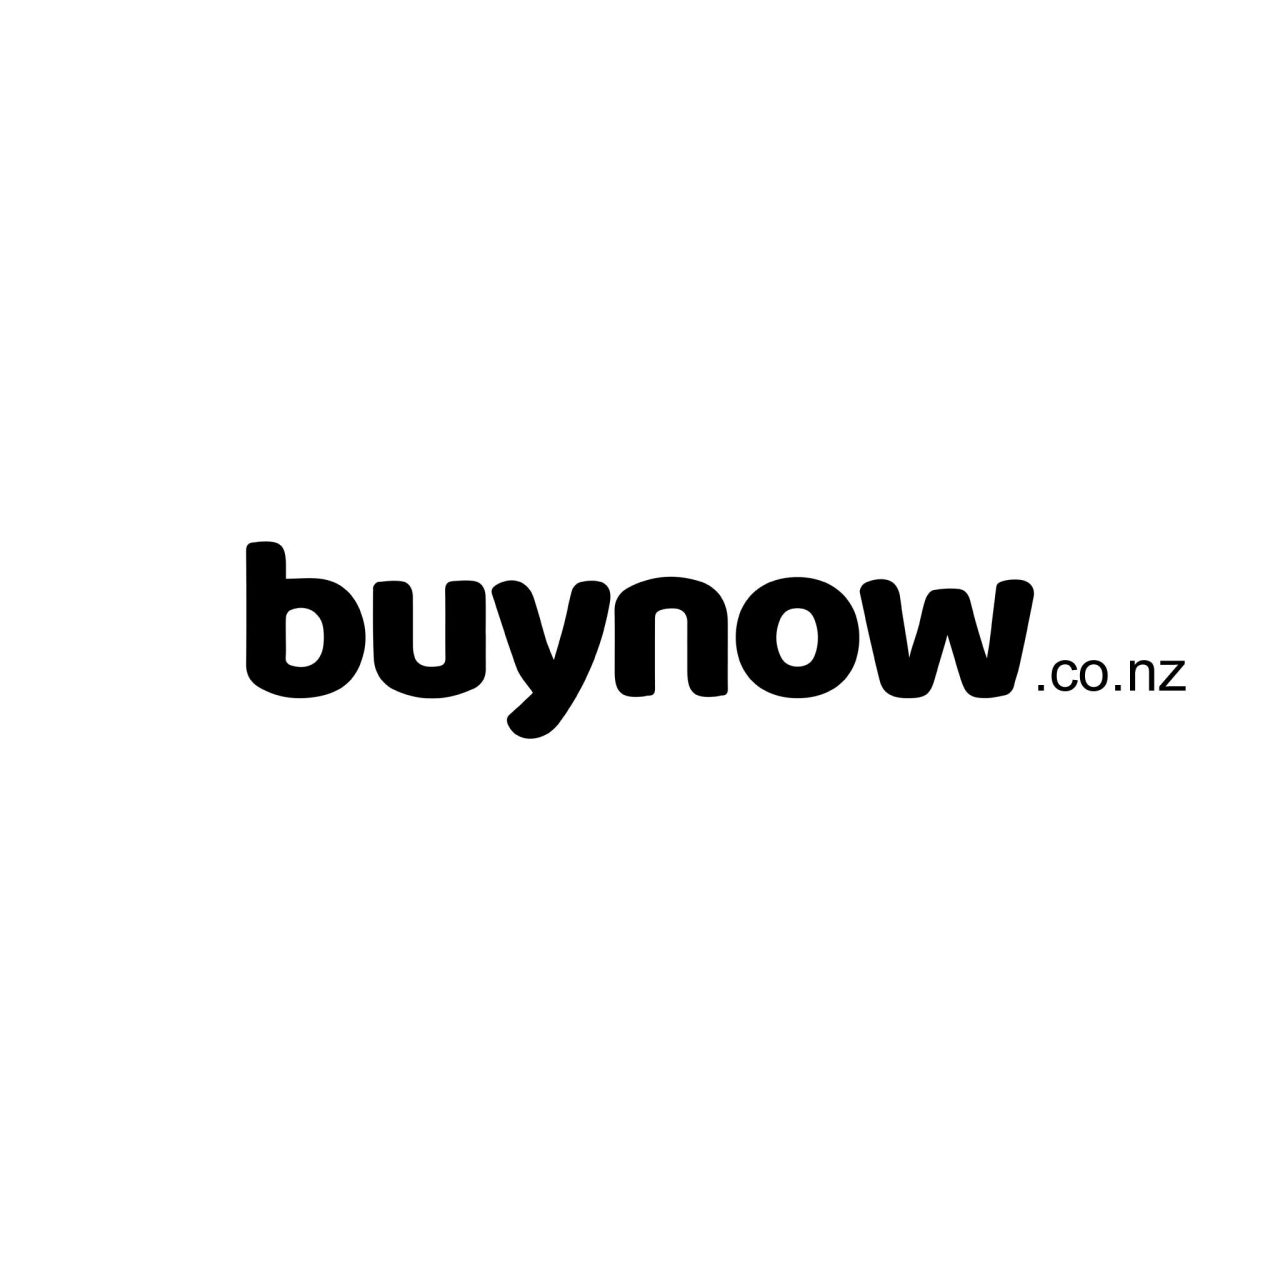 Buynow.co.nz